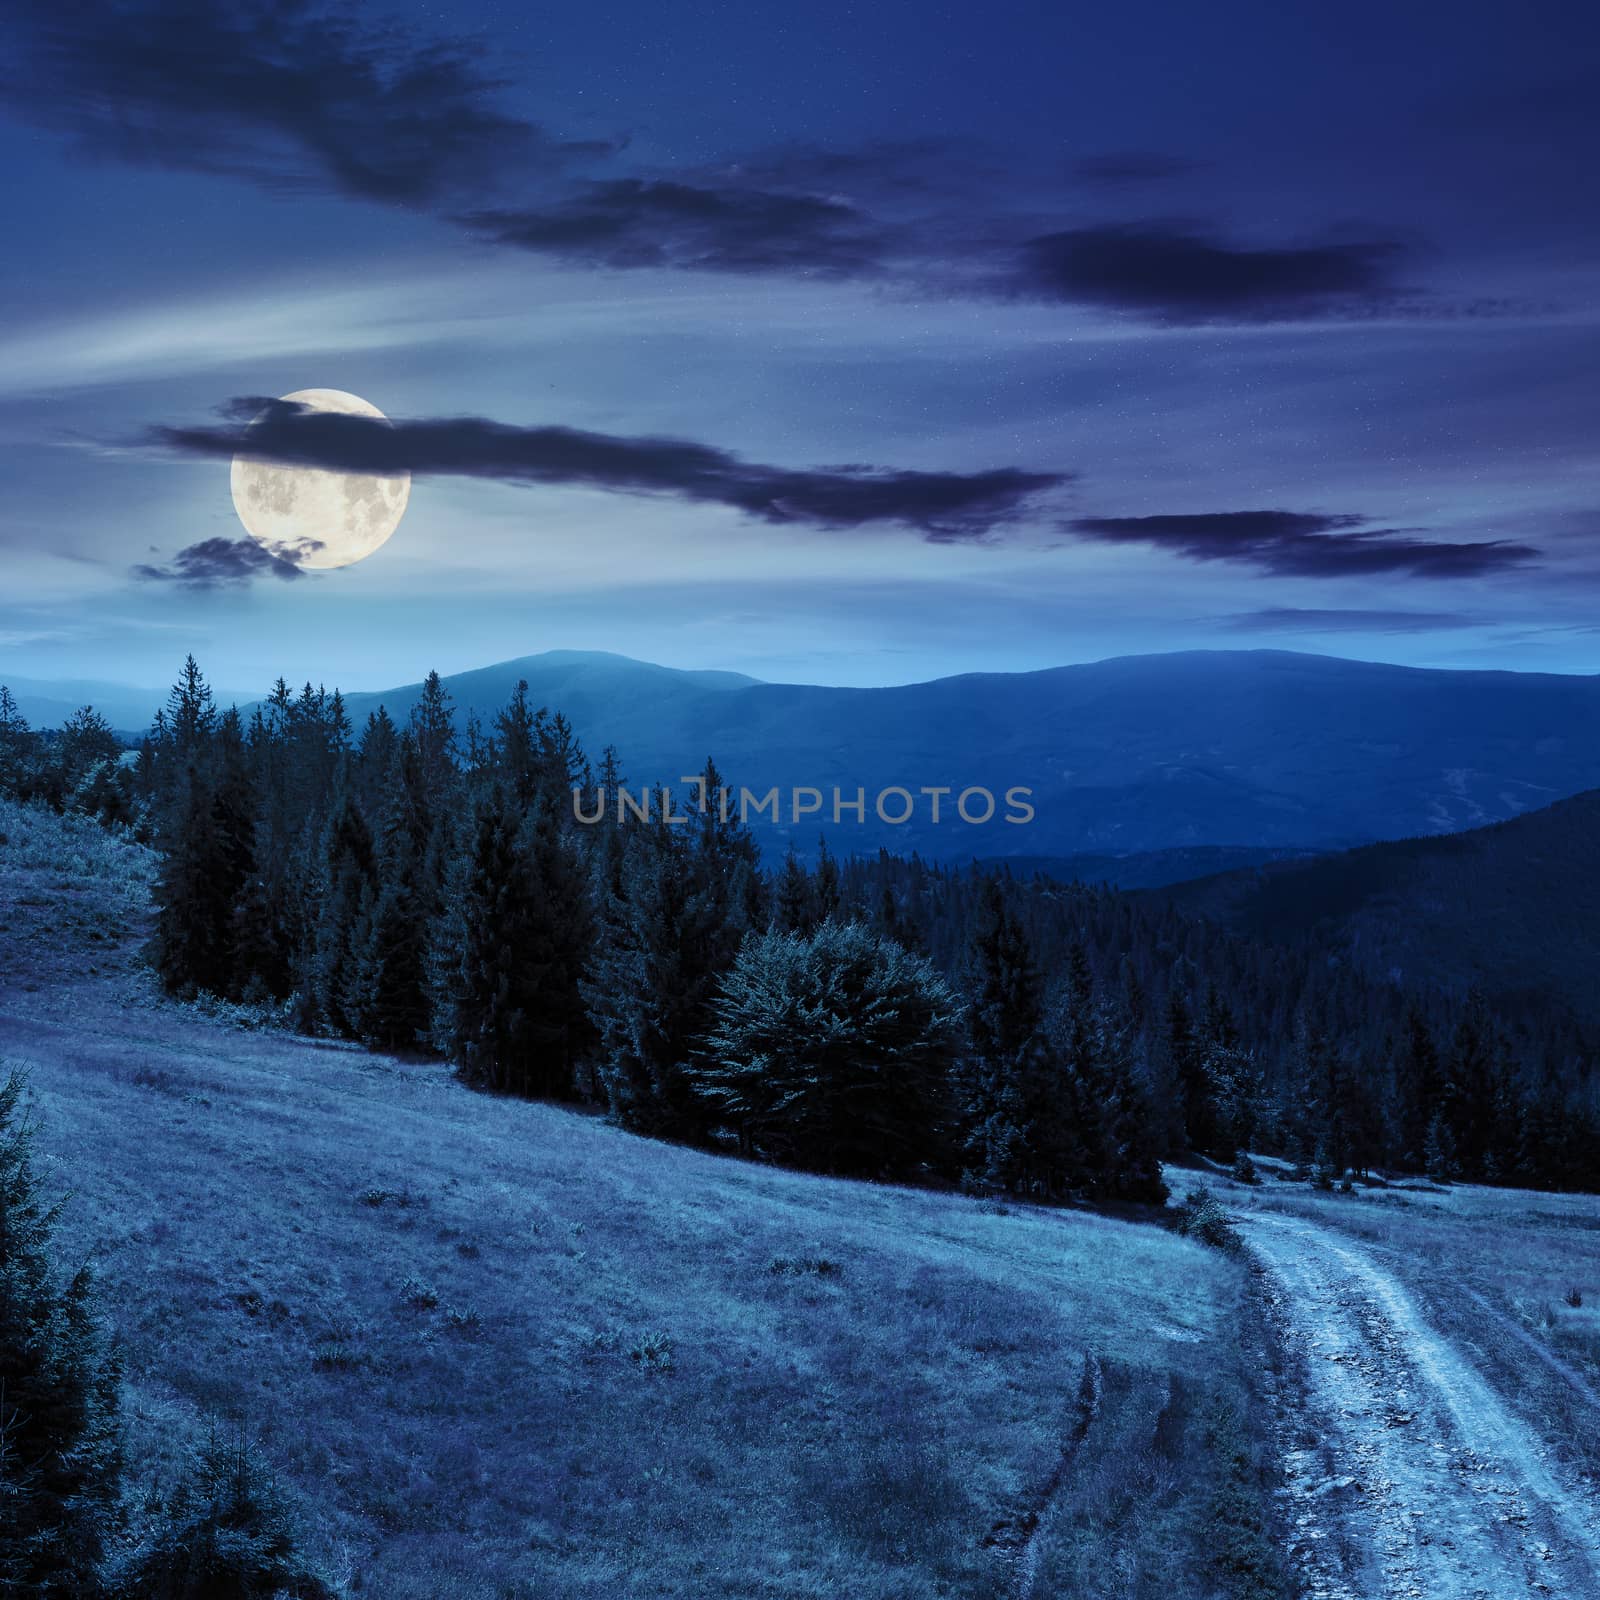 pine trees near the path through meadow  on the hillside. forest in haze on the far mountain at night in full moon light